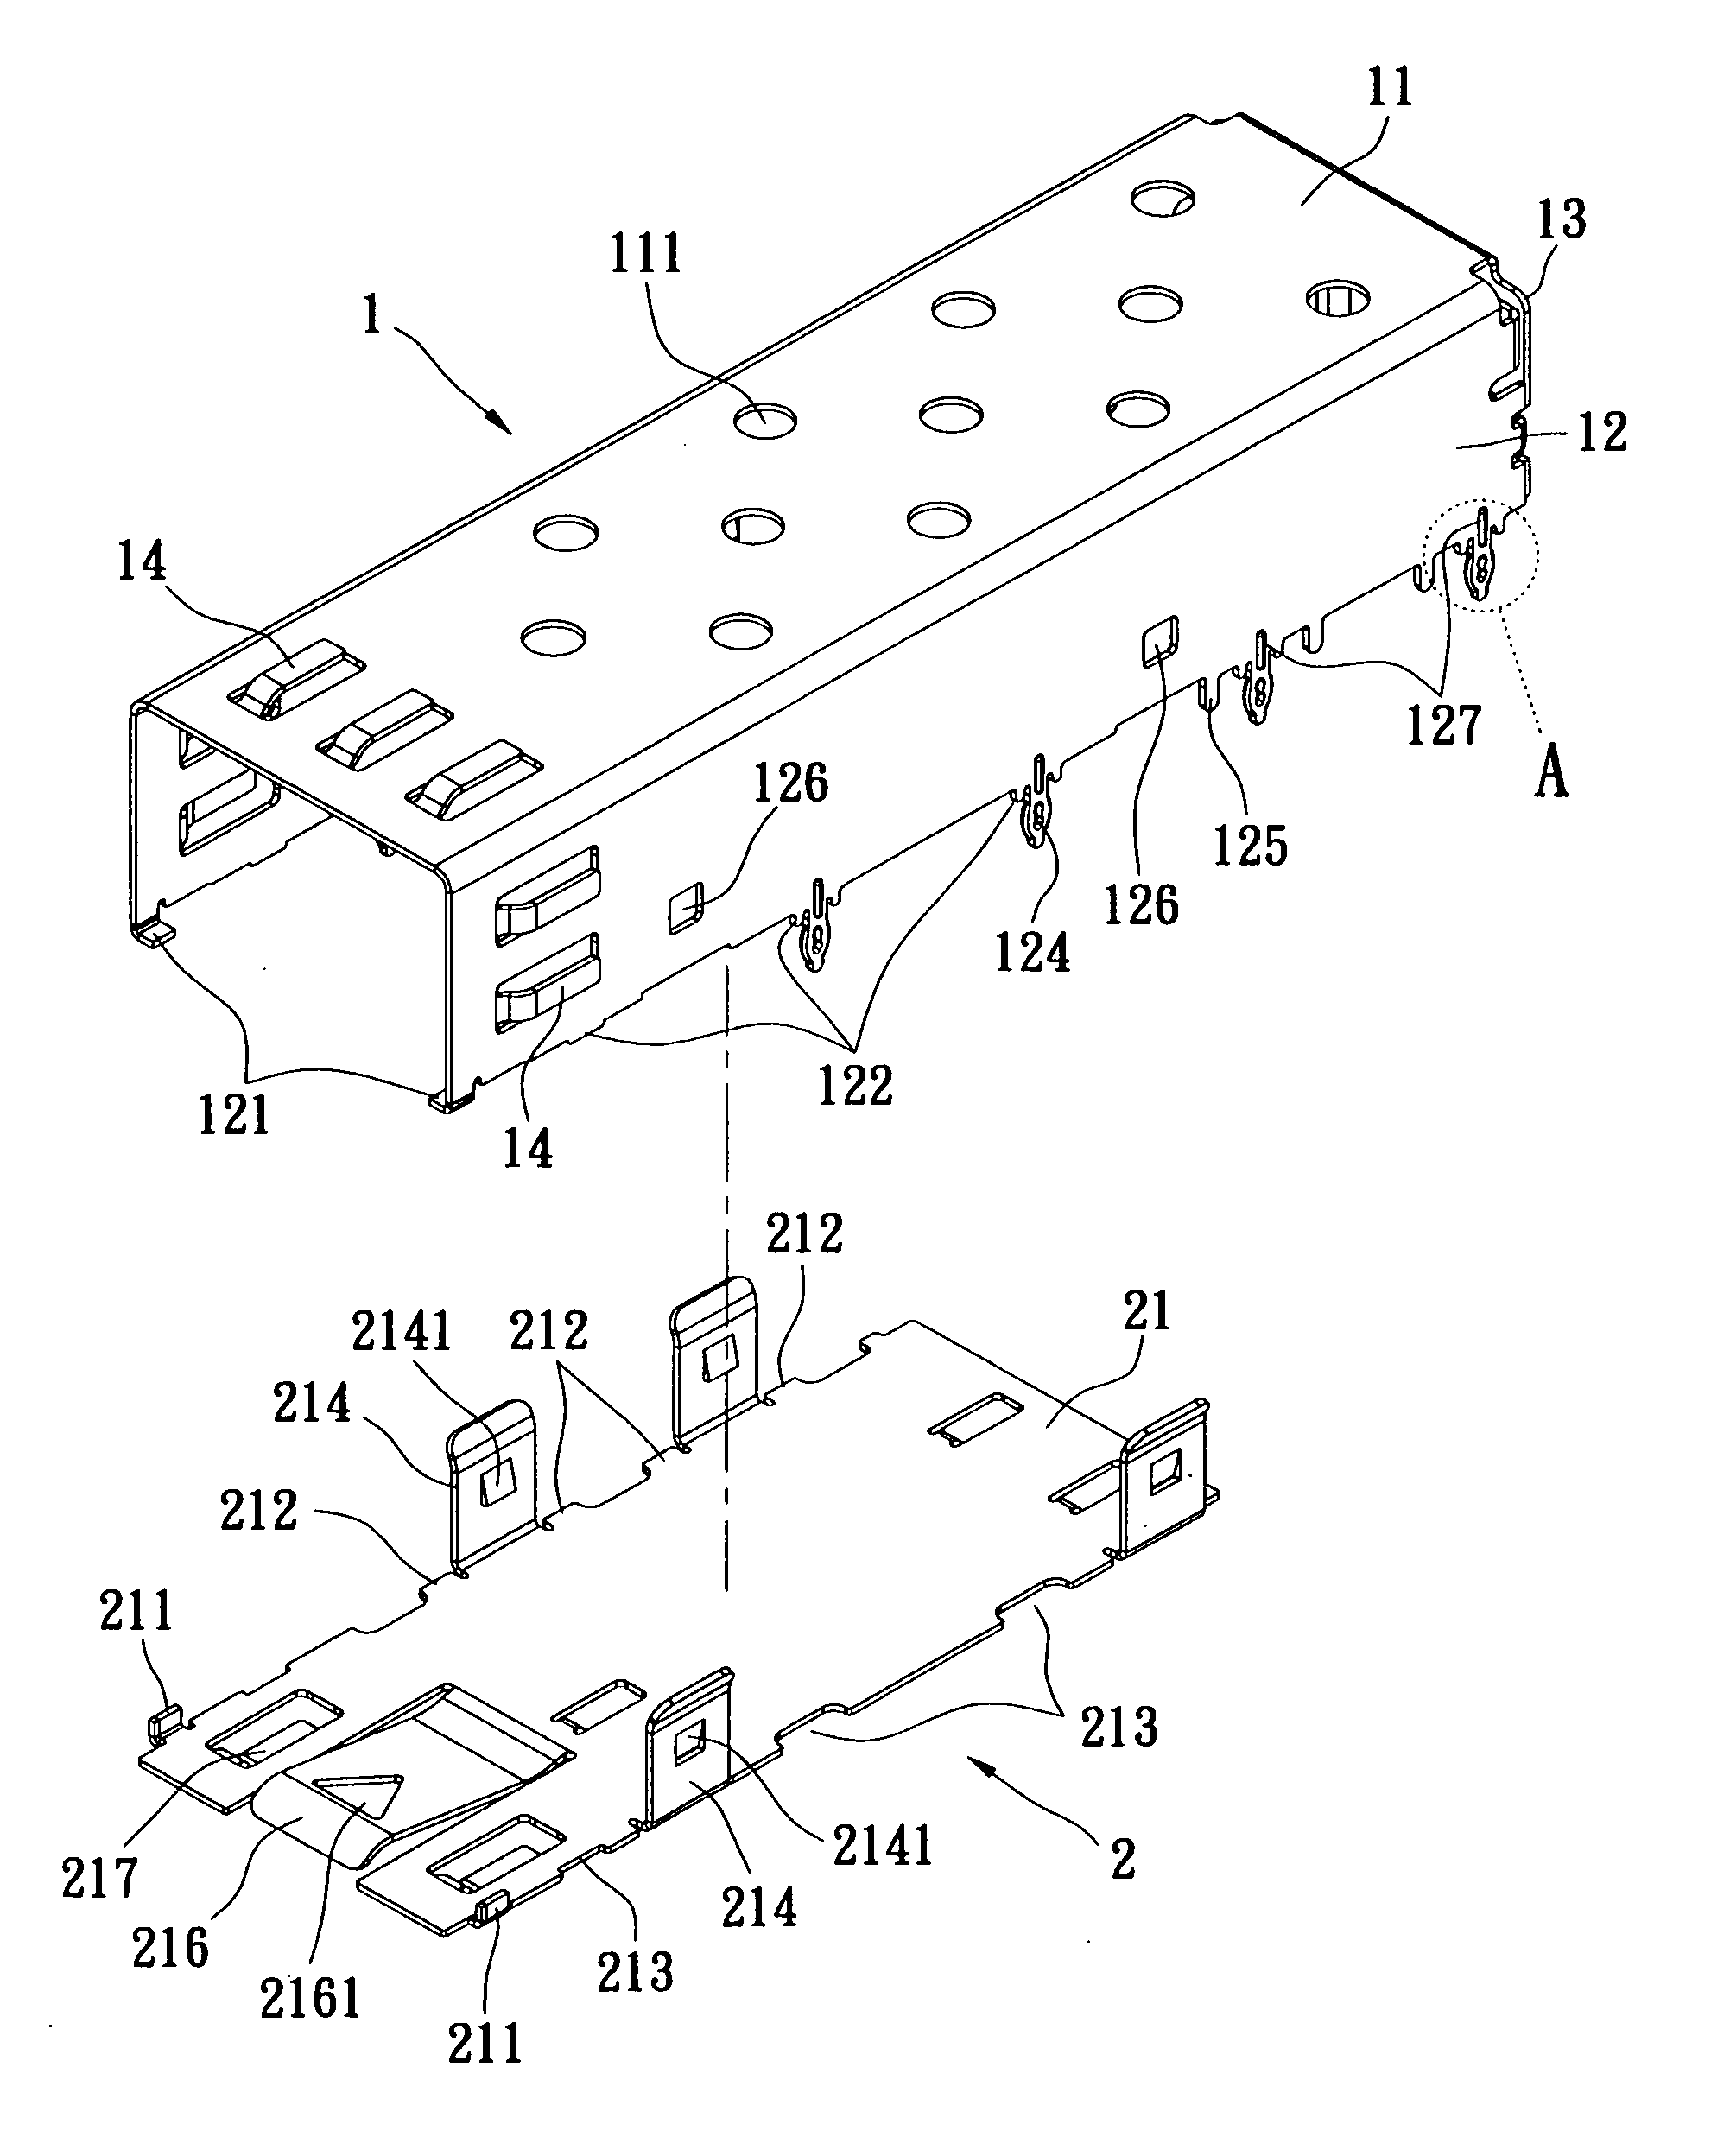 Connector housing for a small and portable transmitting-receiving module